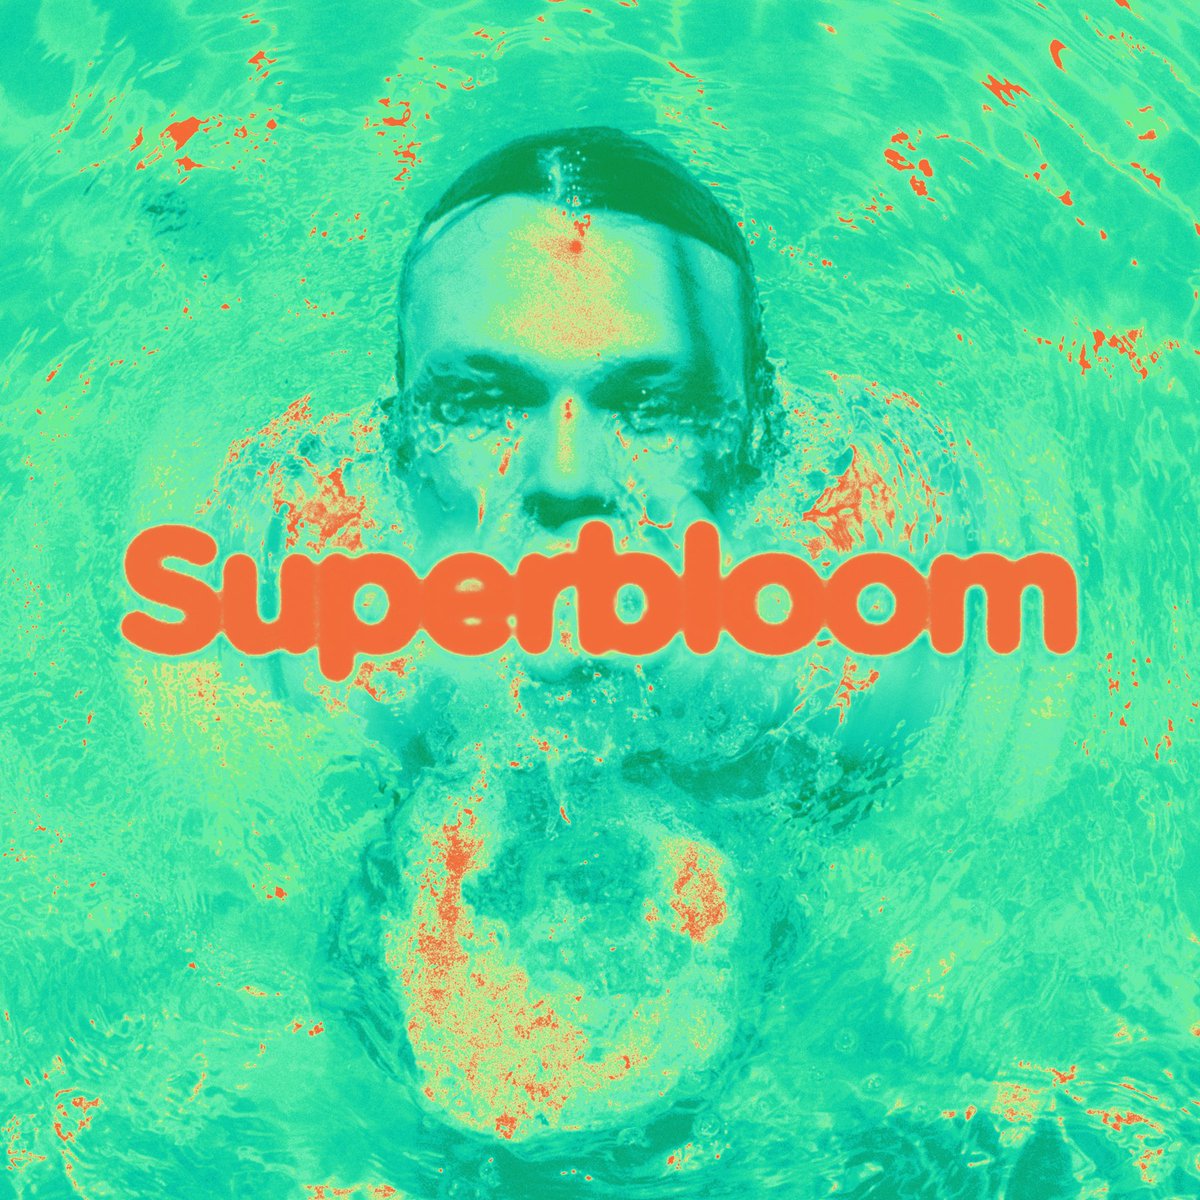 It is with a great explosion of joy and with my entire soul that I proudly announce that I am releasing my first solo record on Oct 23.  #Superbloom explores my inner philosophies and feelings about the walk of life I have found myself on. Pre-save now:  https://ashtonirwin.ffm.to/Superbloom 